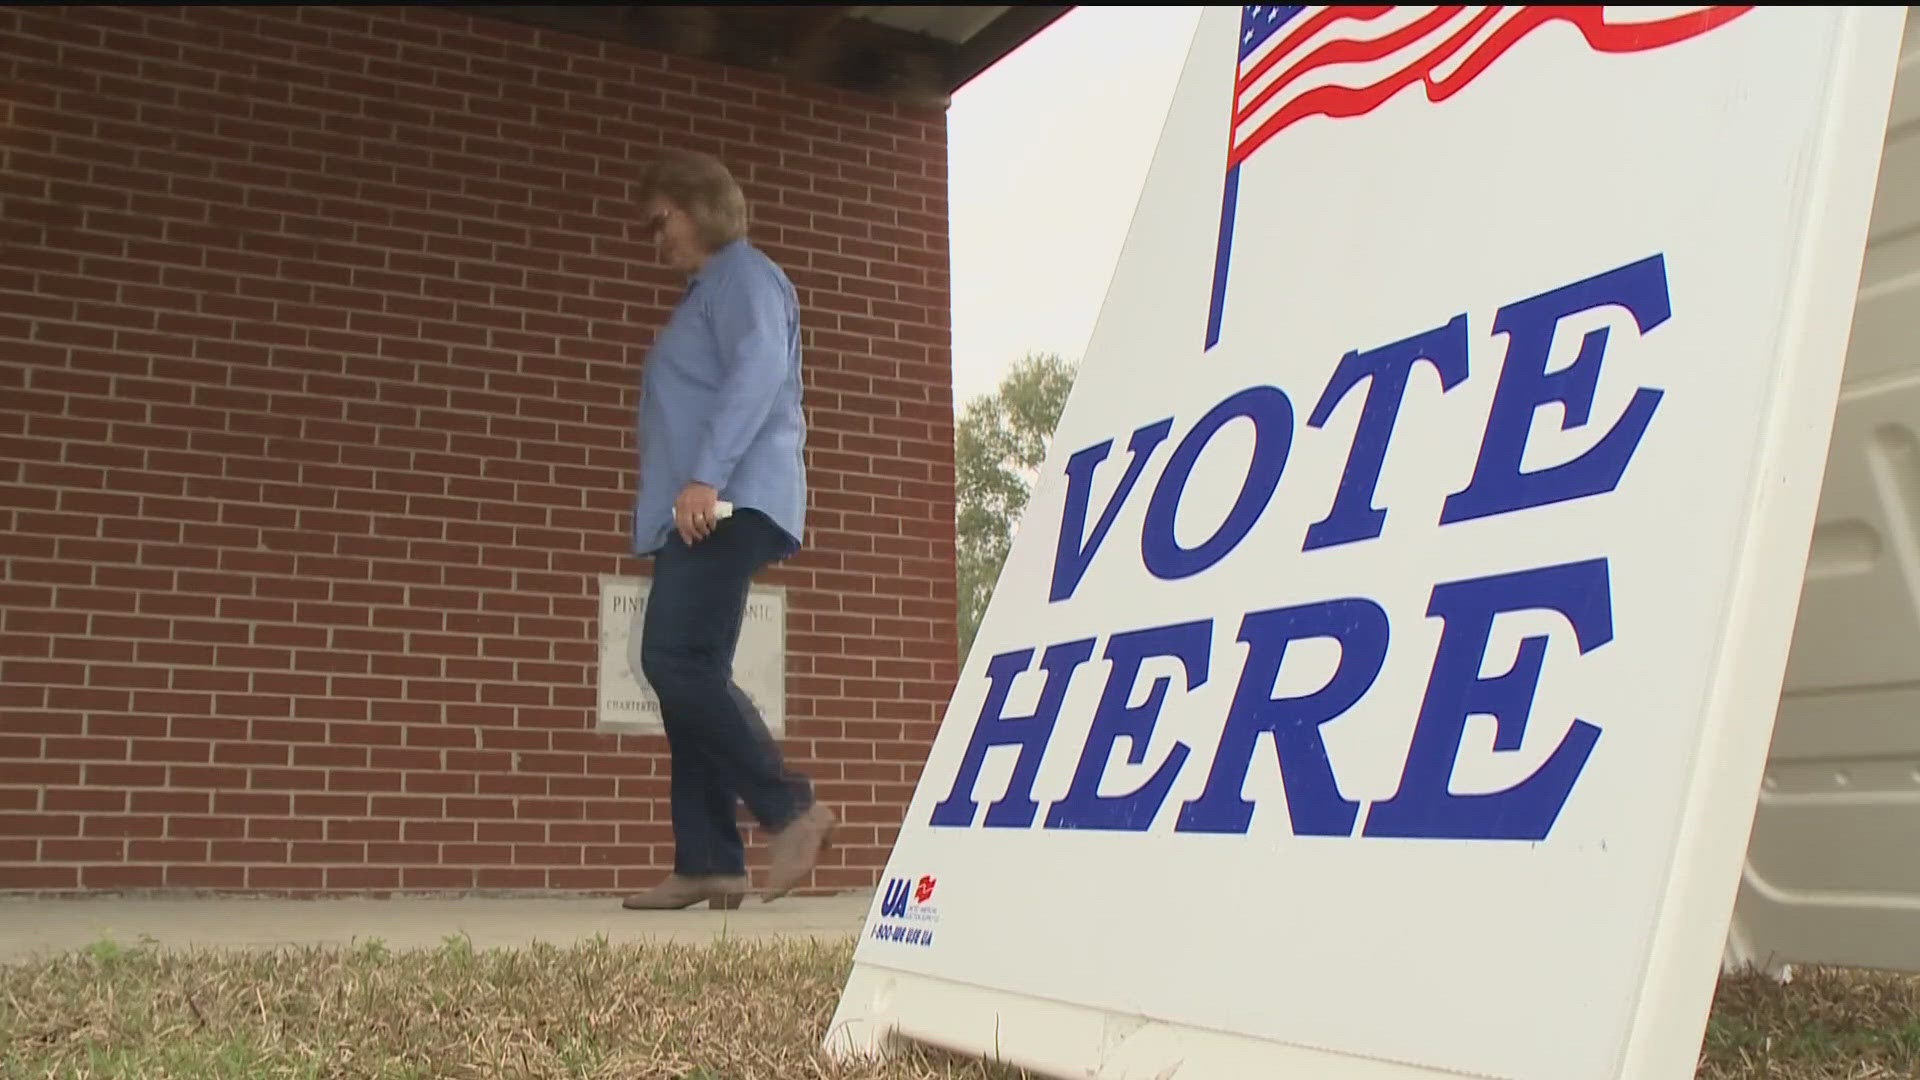 This means Peach State voters will not have to meet certain criteria and will be able to participate in absentee voting without needing an excuse.